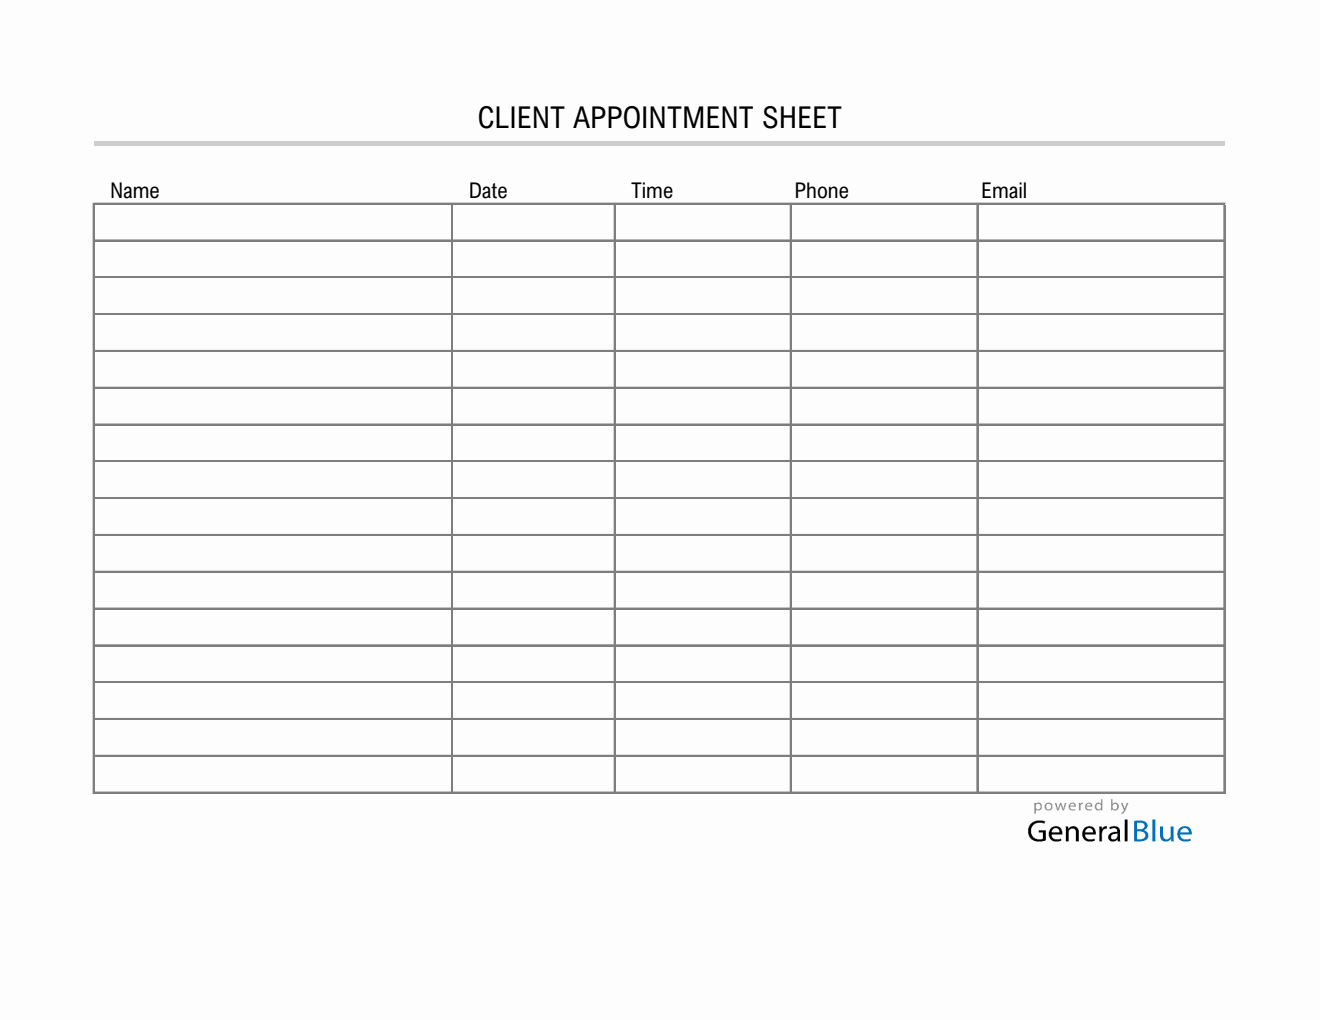 Client Appointment Sheet Template in Excel (Basic)